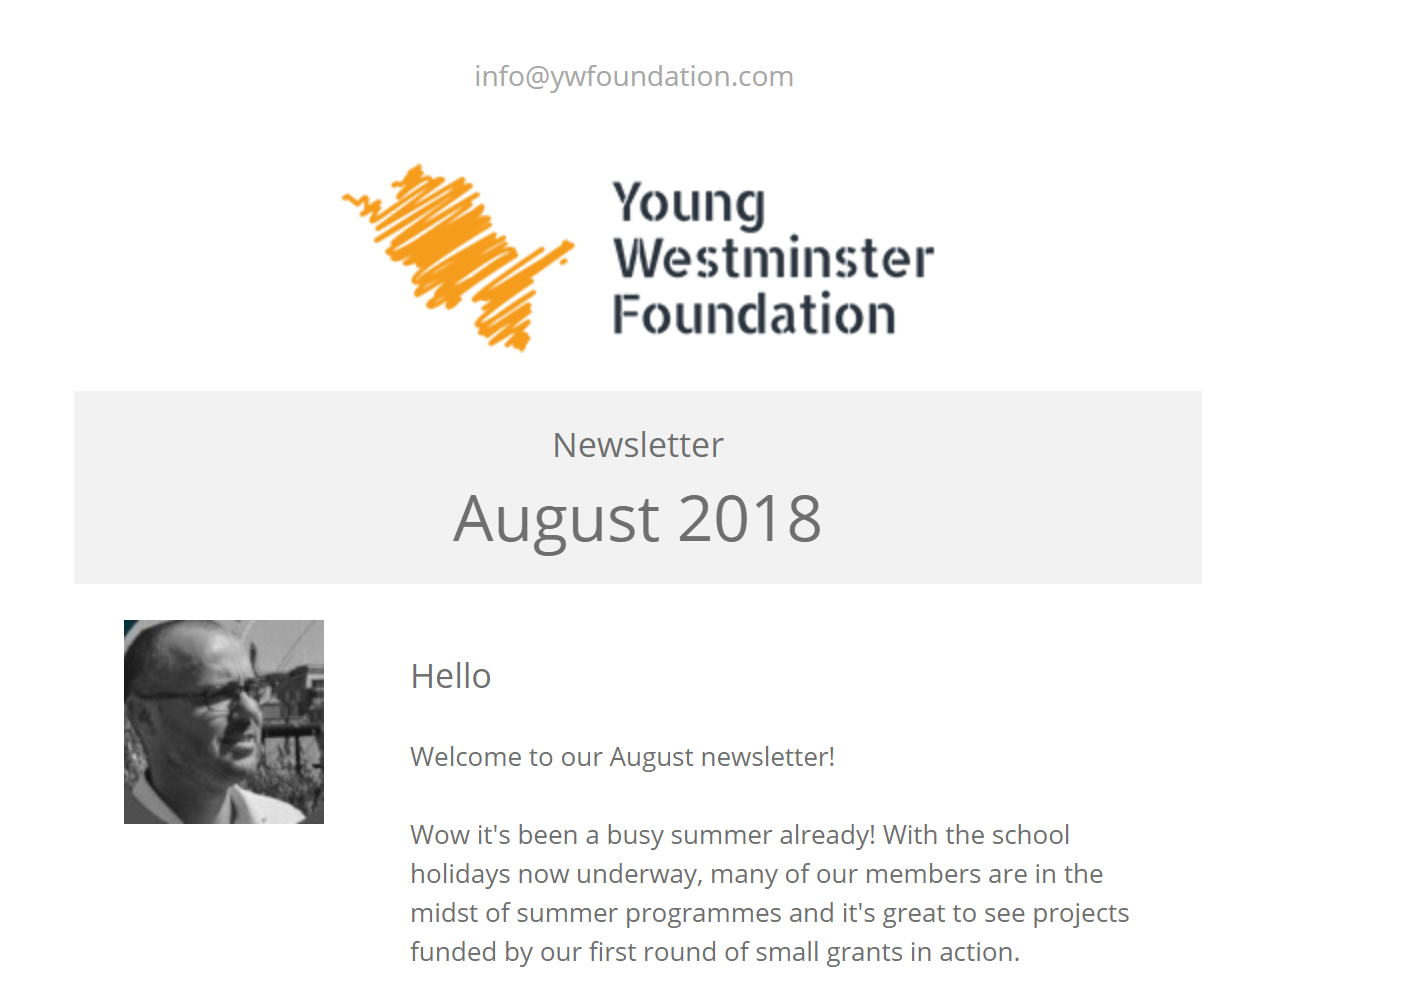 August Newsletter Out Now